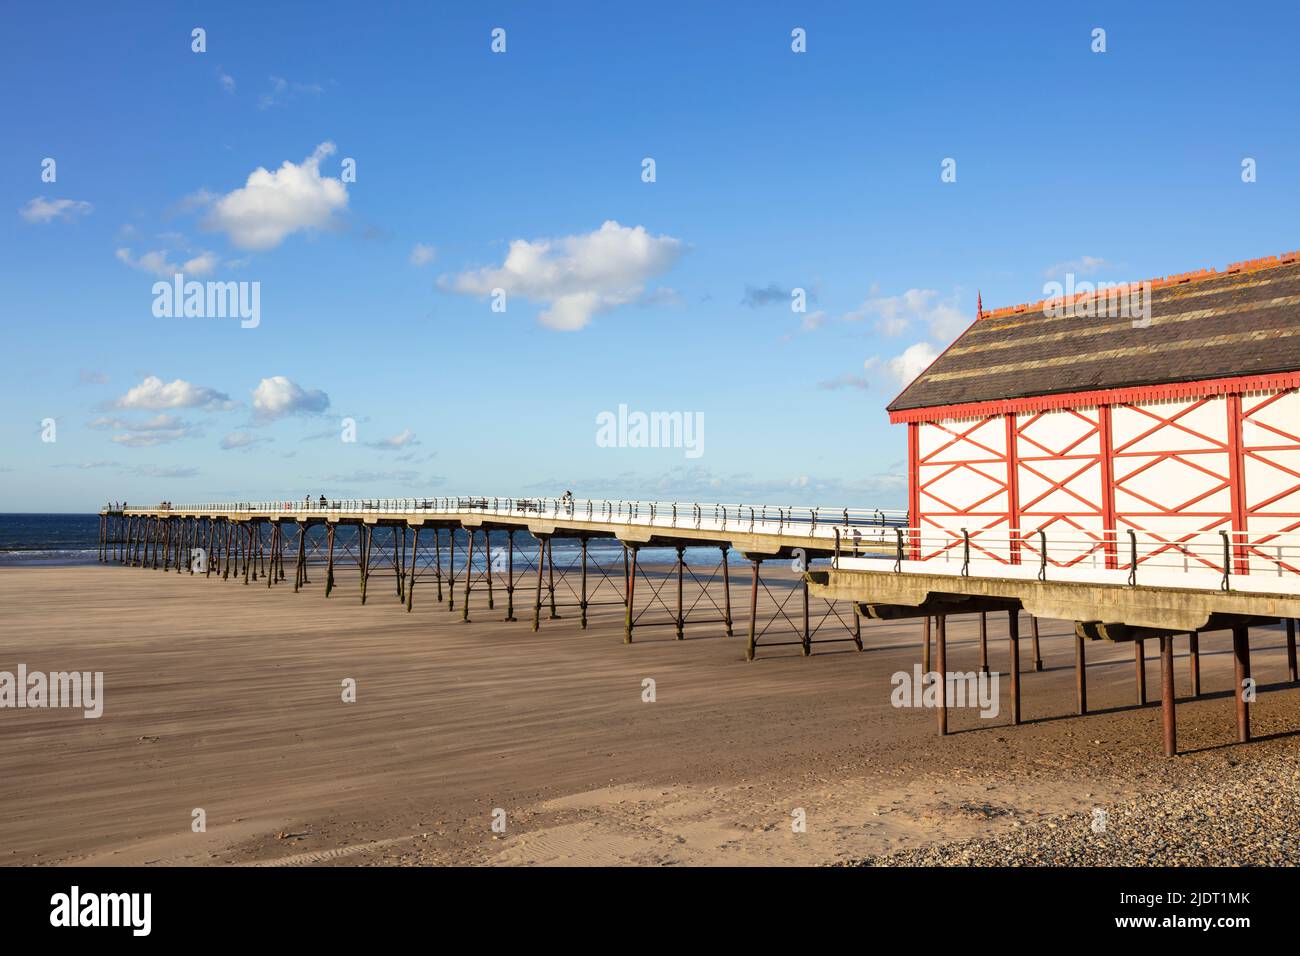 Saltburn by the sea Yorkshire Saltburn Pier a restored Victorian pier and beach Saltburn by the Sea North Yorkshire Redcar and Cleveland England uk gb Stock Photo